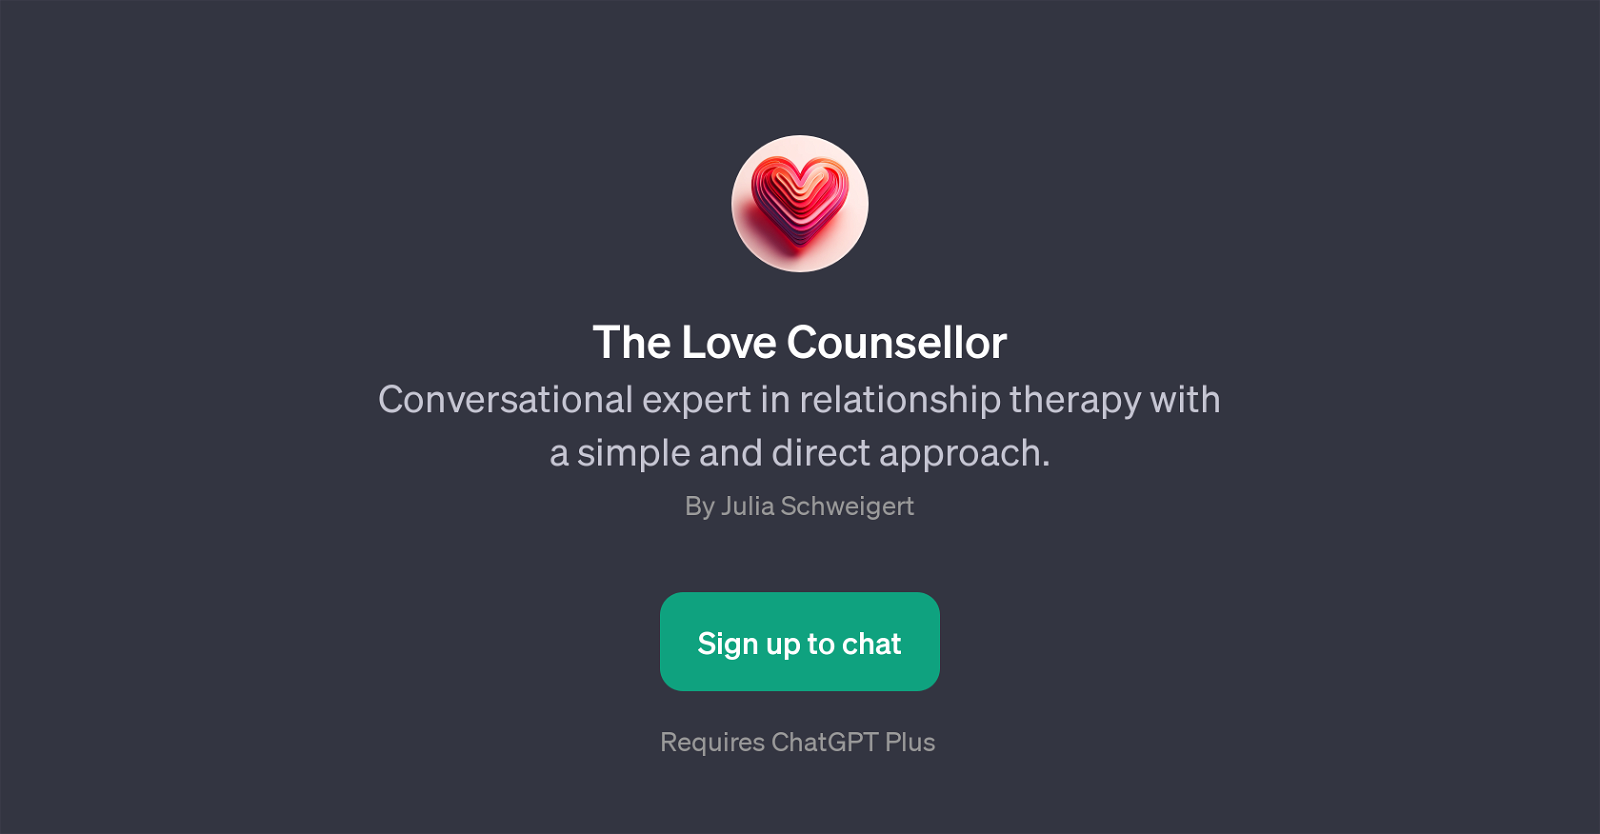 The Love Counsellor website